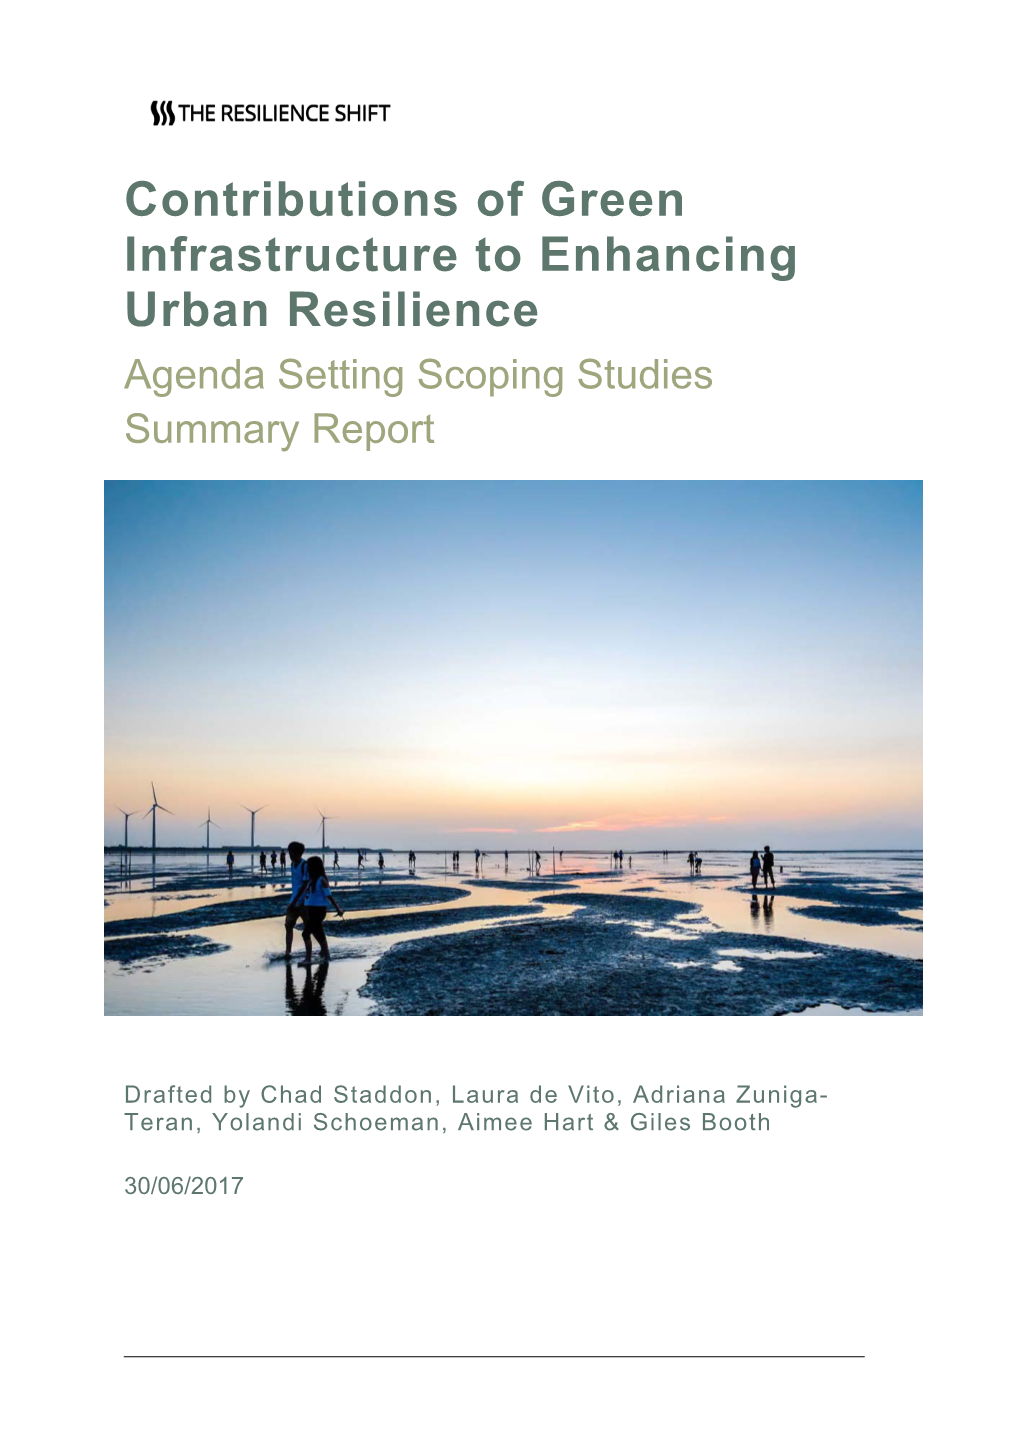 Contributions of Green Infrastructure to Enhancing Urban Resilience Agenda Setting Scoping Studies Summary Report